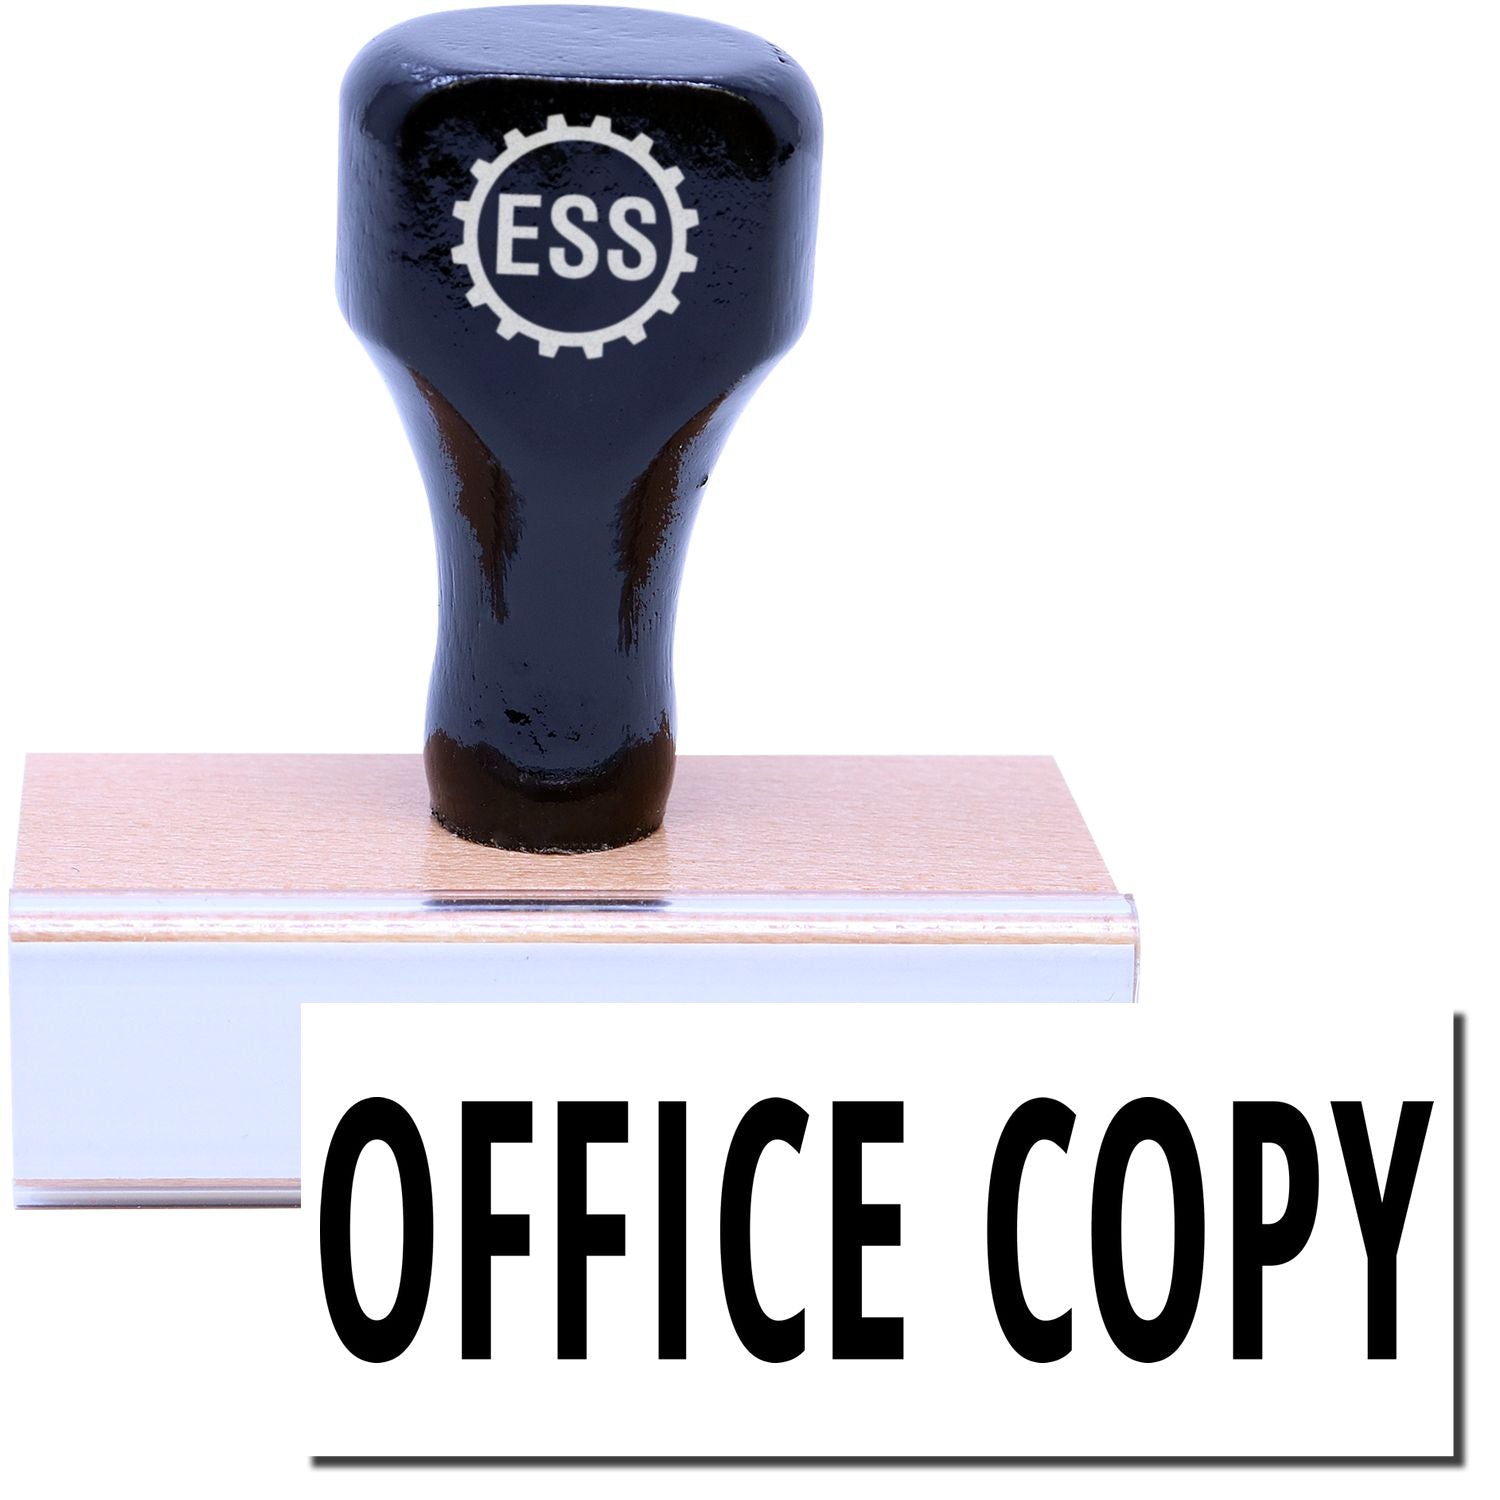 A stock office rubber stamp with a stamped image showing how the text "OFFICE COPY" is displayed after stamping.